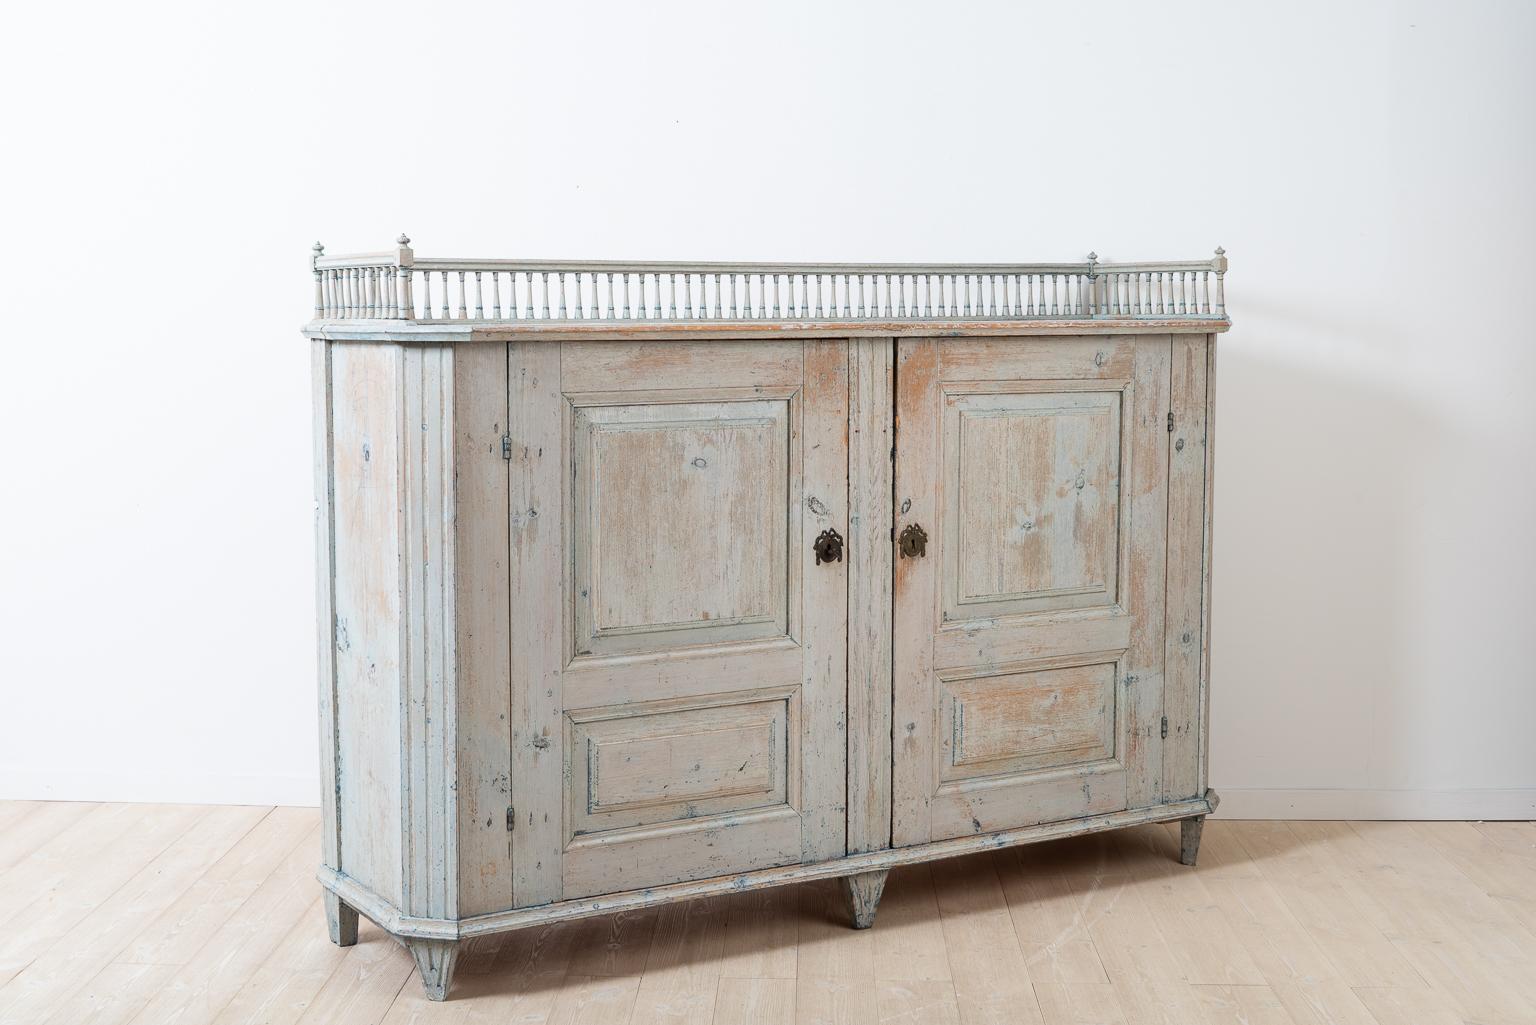 18th Century Swedish Gustavian Sideboard with a Balustrade and Original Paint